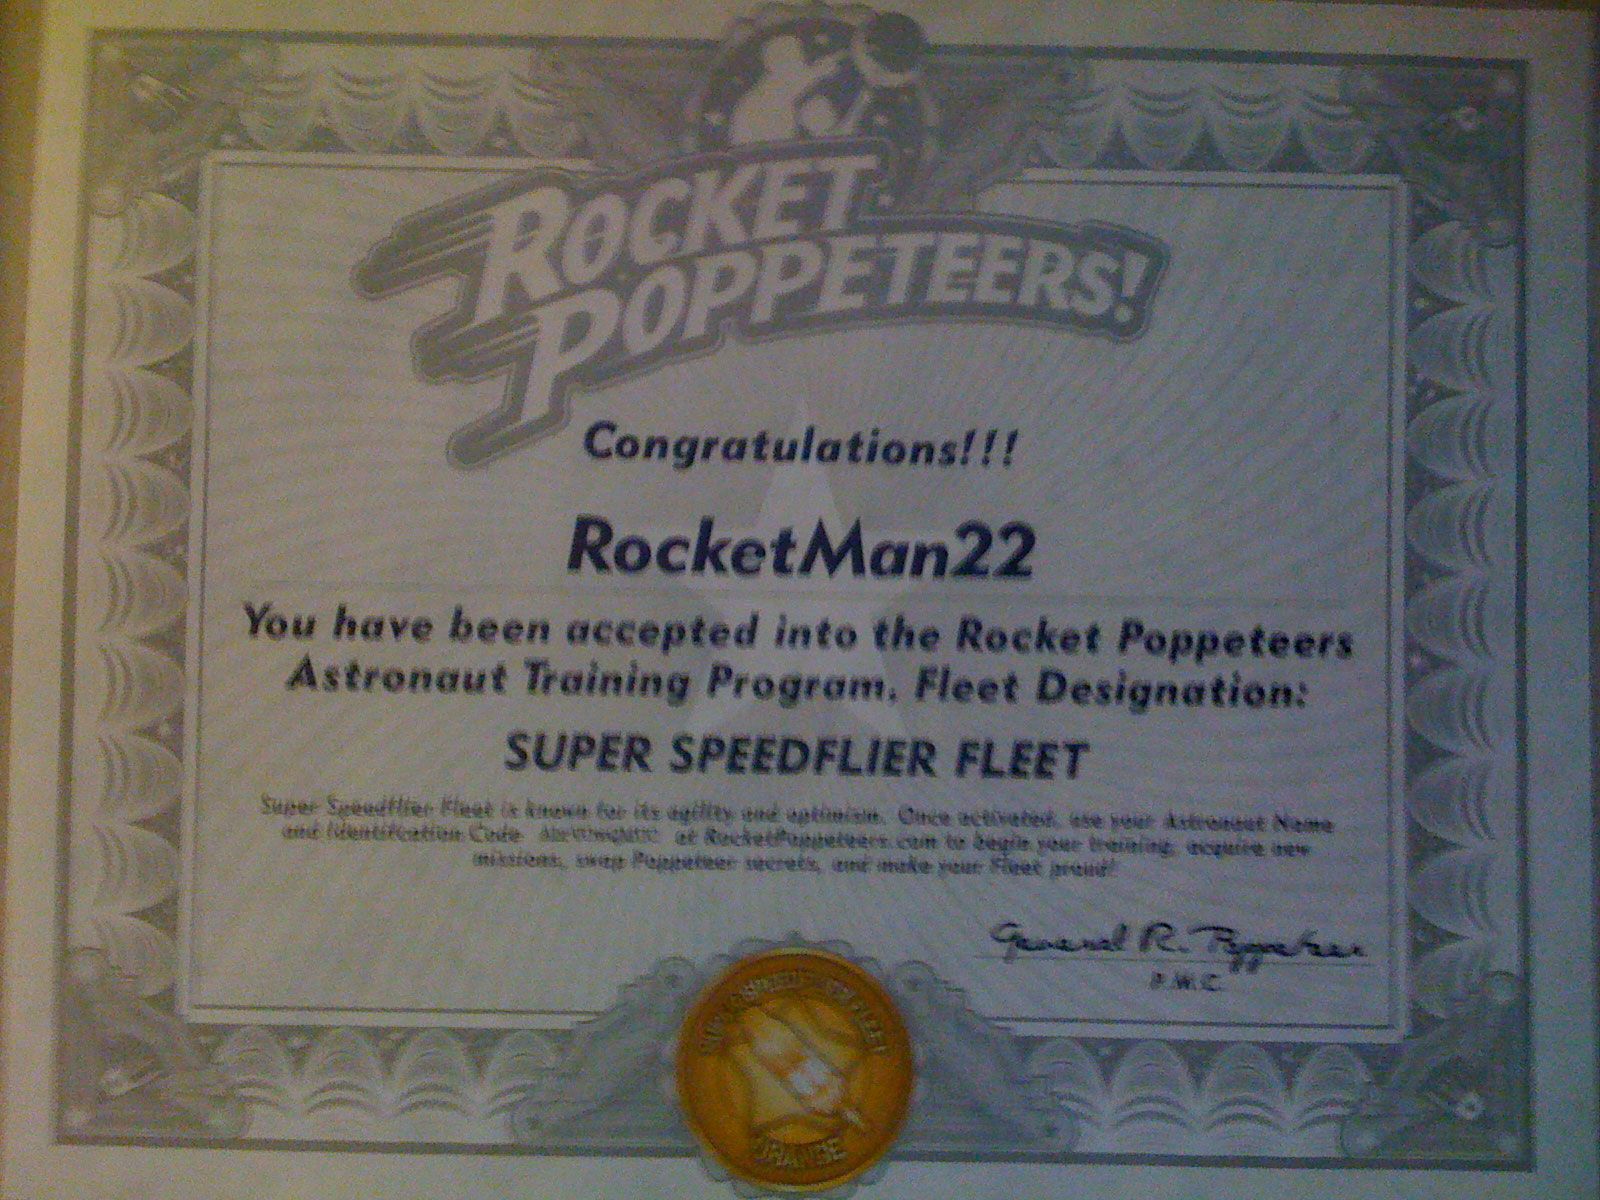 Super 8 Rocket Poppeteers Photo #2